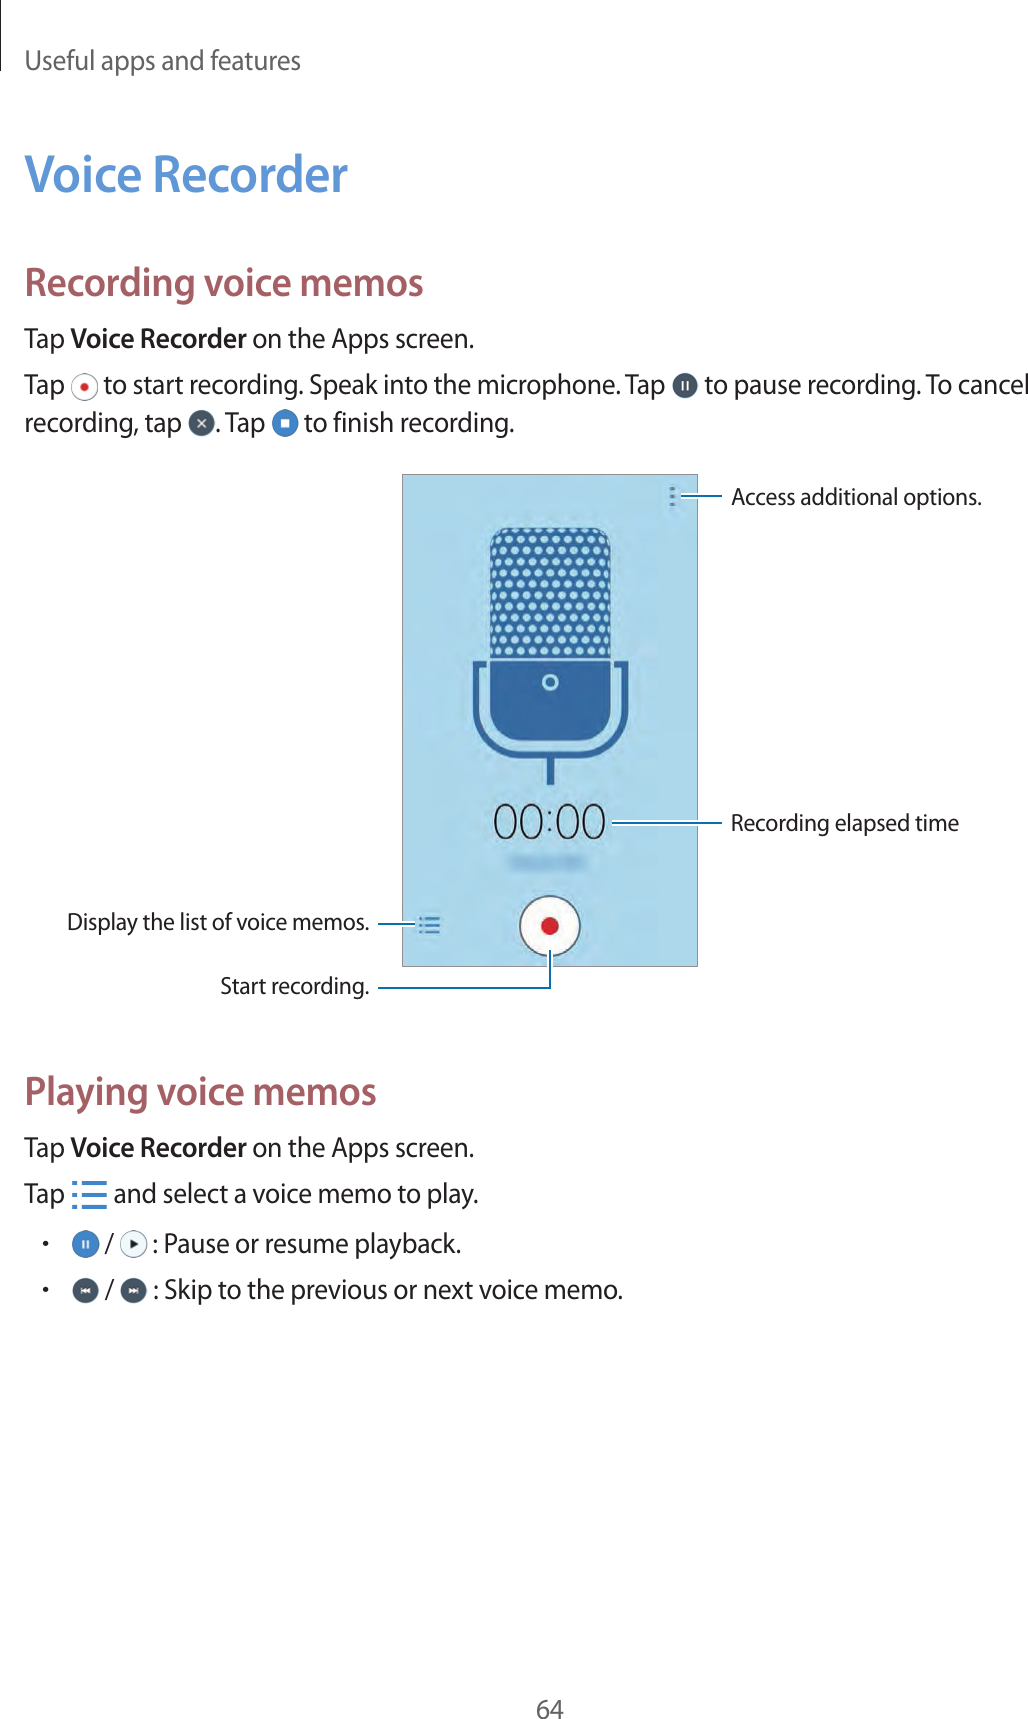 Useful apps and features64Voice RecorderRecording voice memosTap Voice Recorder on the Apps screen.Tap   to start recording. Speak into the microphone. Tap   to pause recording. To cancel recording, tap  . Tap   to finish recording.Display the list of voice memos.Access additional options.Start recording.Recording elapsed timePlaying voice memosTap Voice Recorder on the Apps screen.Tap   and select a voice memo to play.• /   : Pause or resume playback.• /   : Skip to the previous or next voice memo.